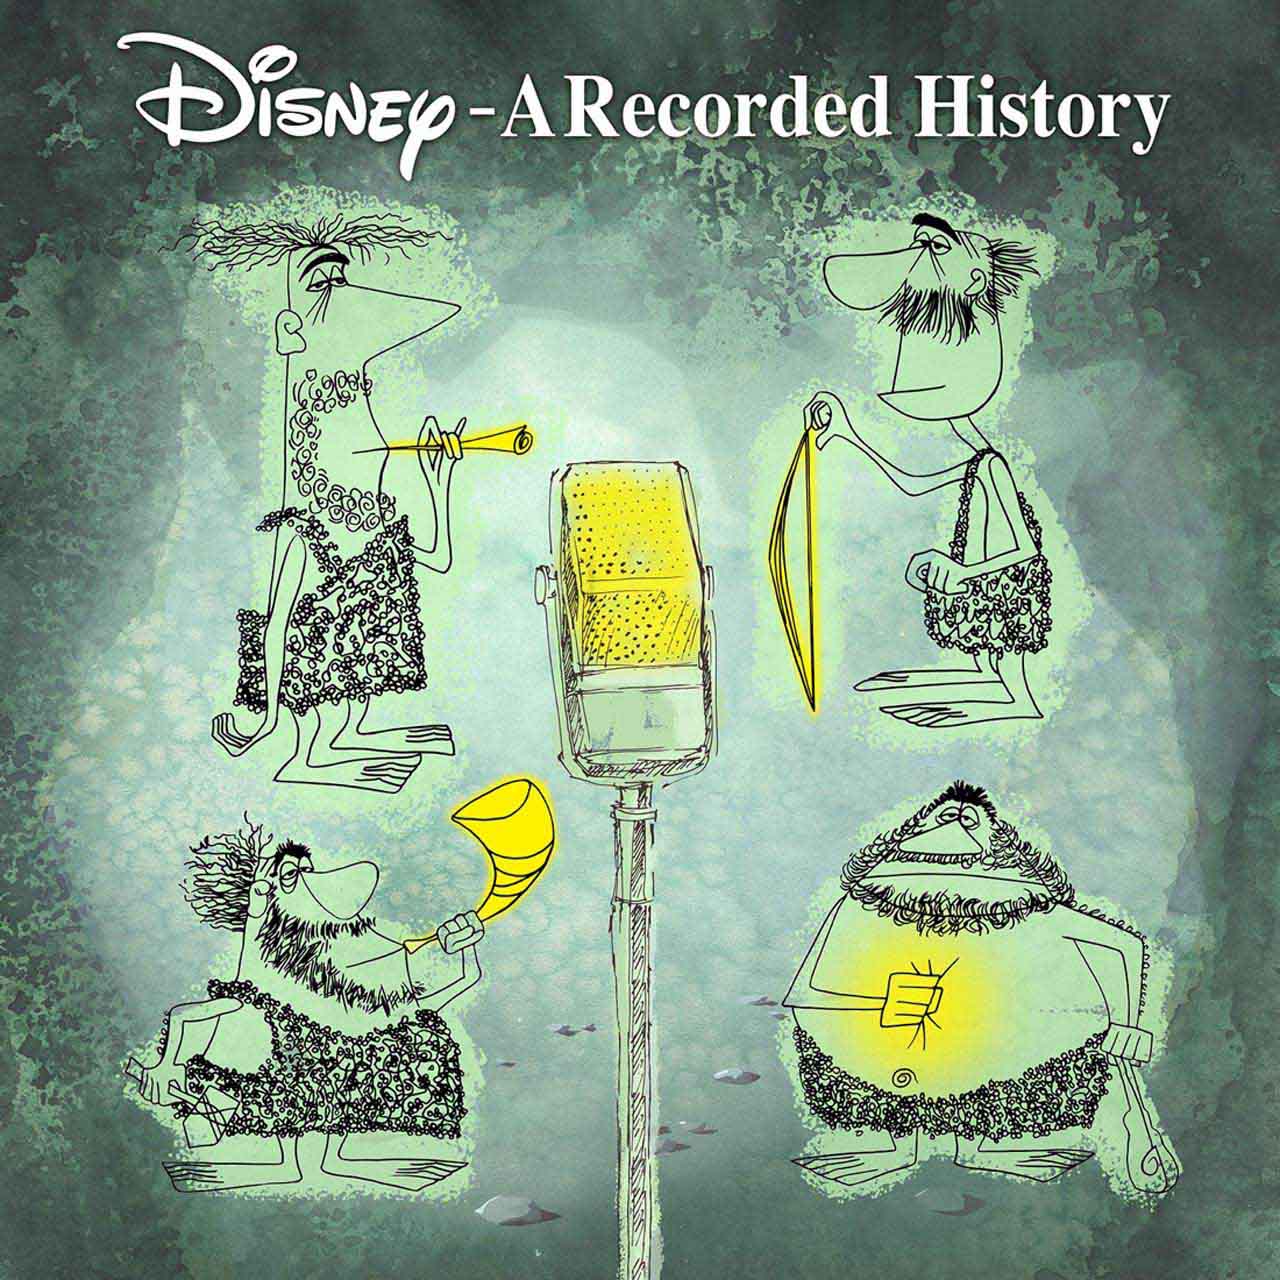 New limited podcast series “Disney A Recorded History” starts